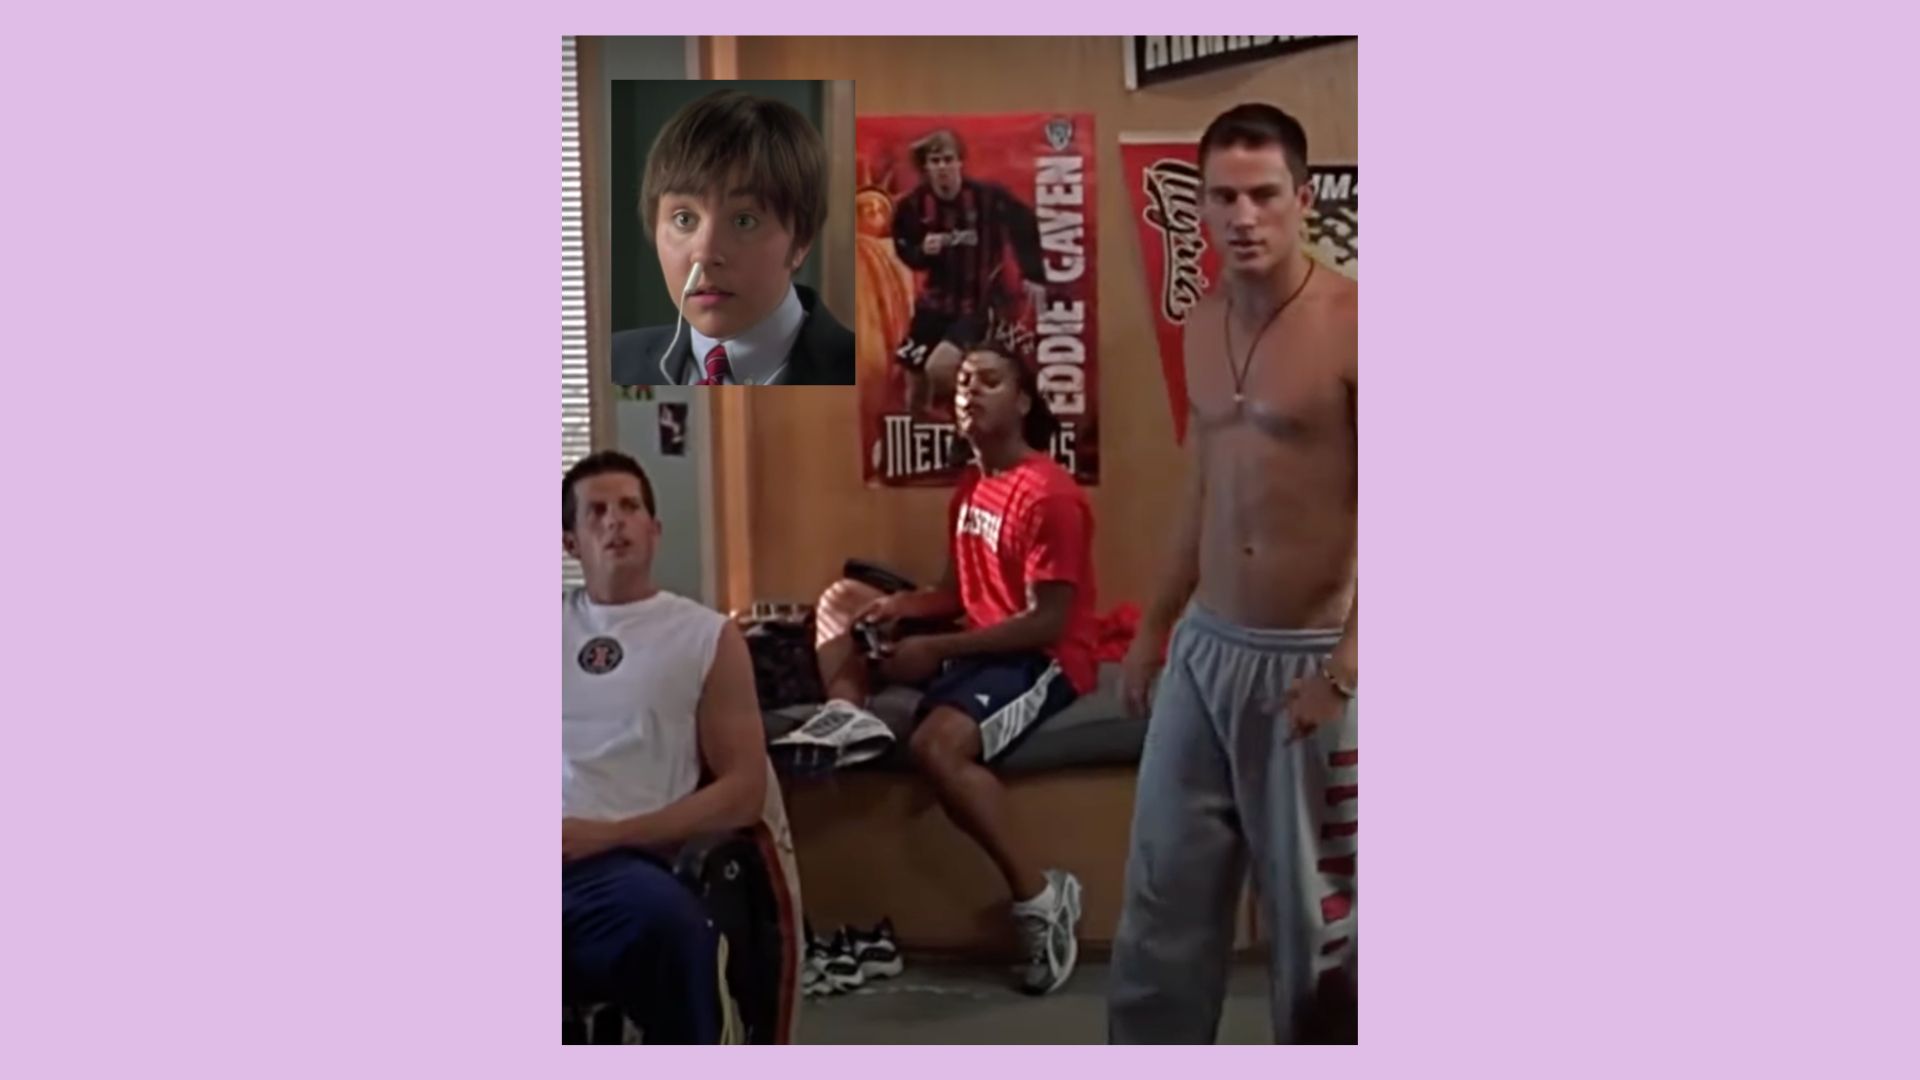 Sebastian from “She’s the Man” with a tampon in her nose, over an image of the other soccer players reacting. The movie stills are edited to look like a BeReal app image.